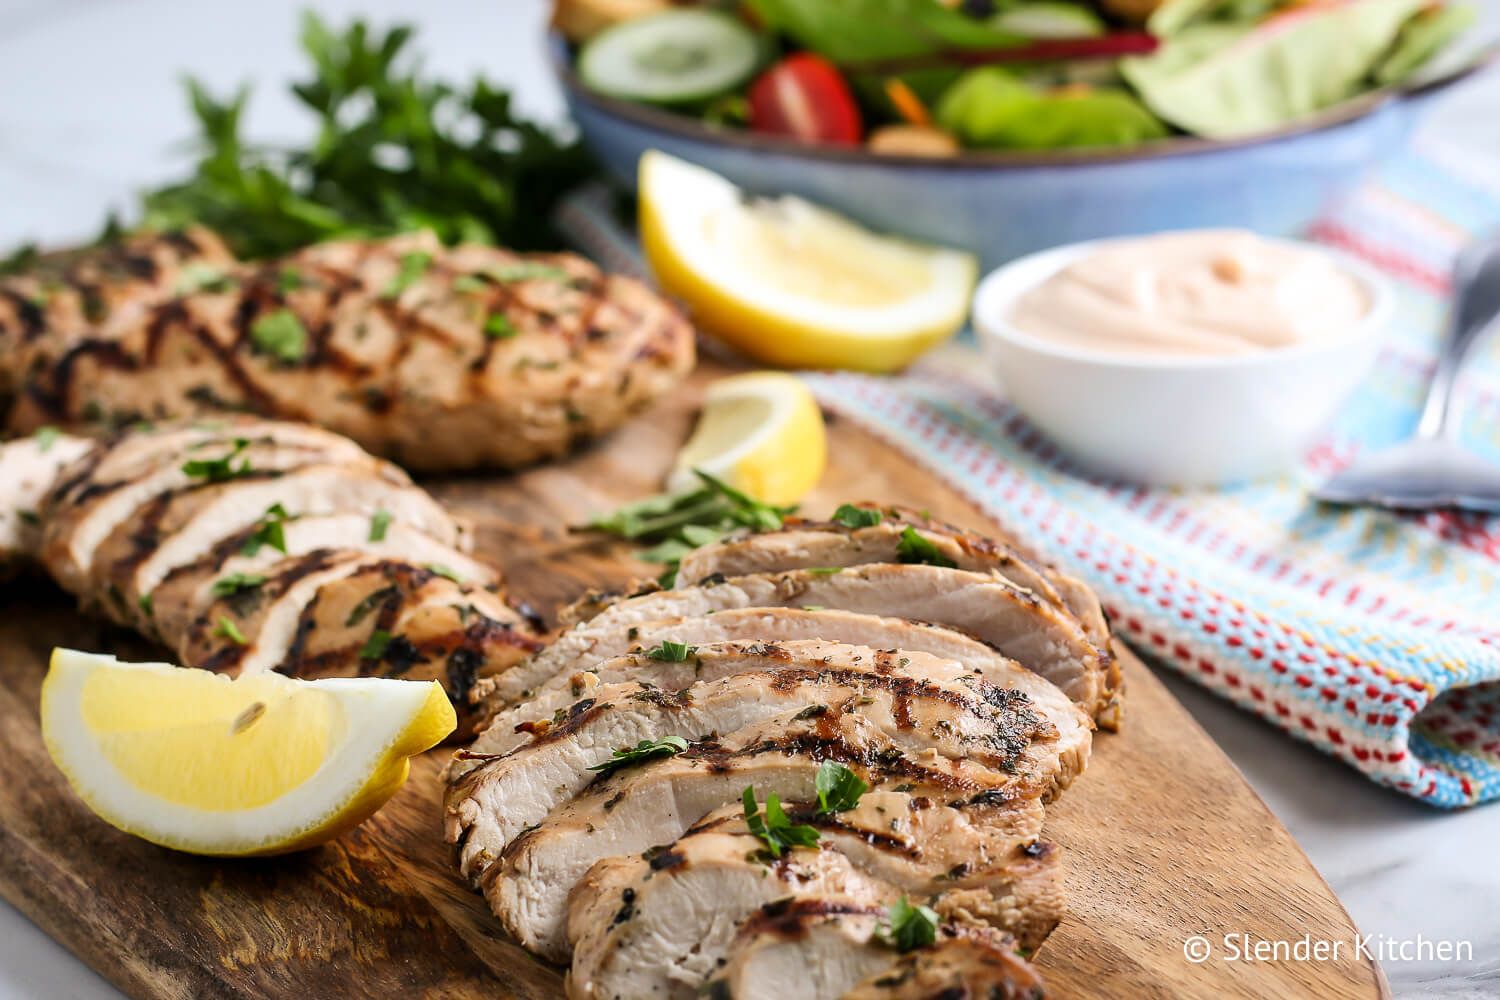 Grilled chicken breasts on a wooden cutting board with salad on the side.